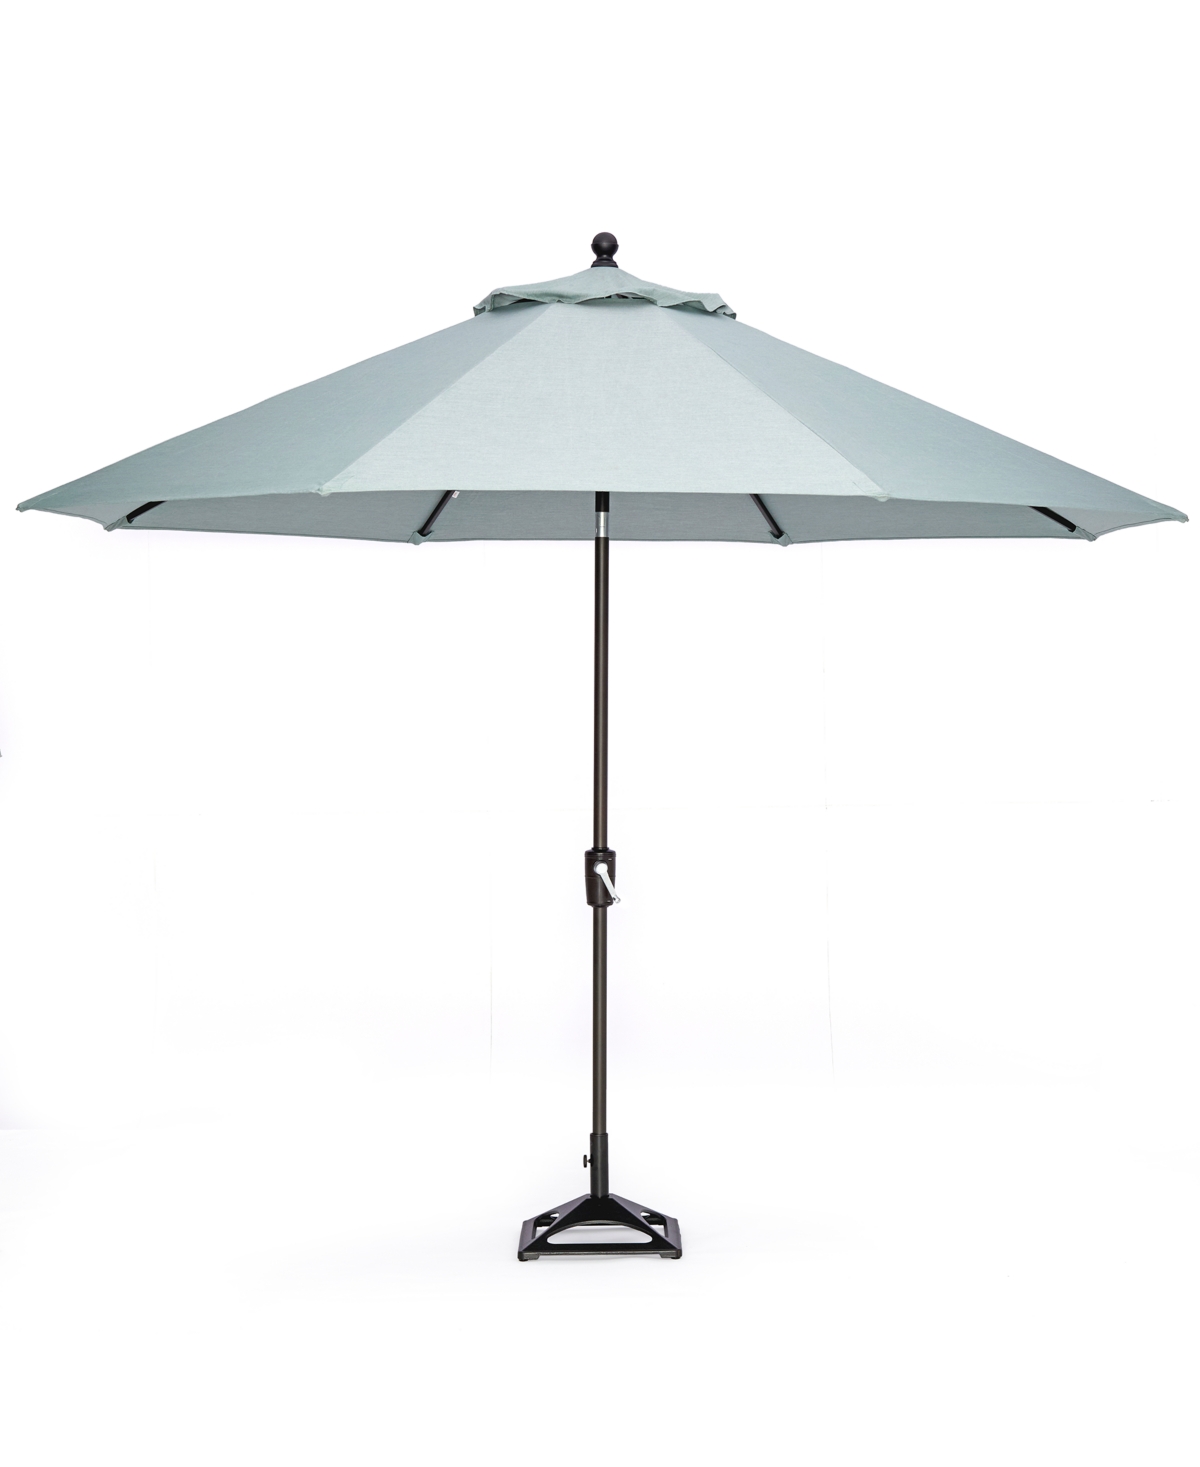 Stockholm Outdoor 11 Umbrella with Outdoor Fabric and Base, Created for Macys